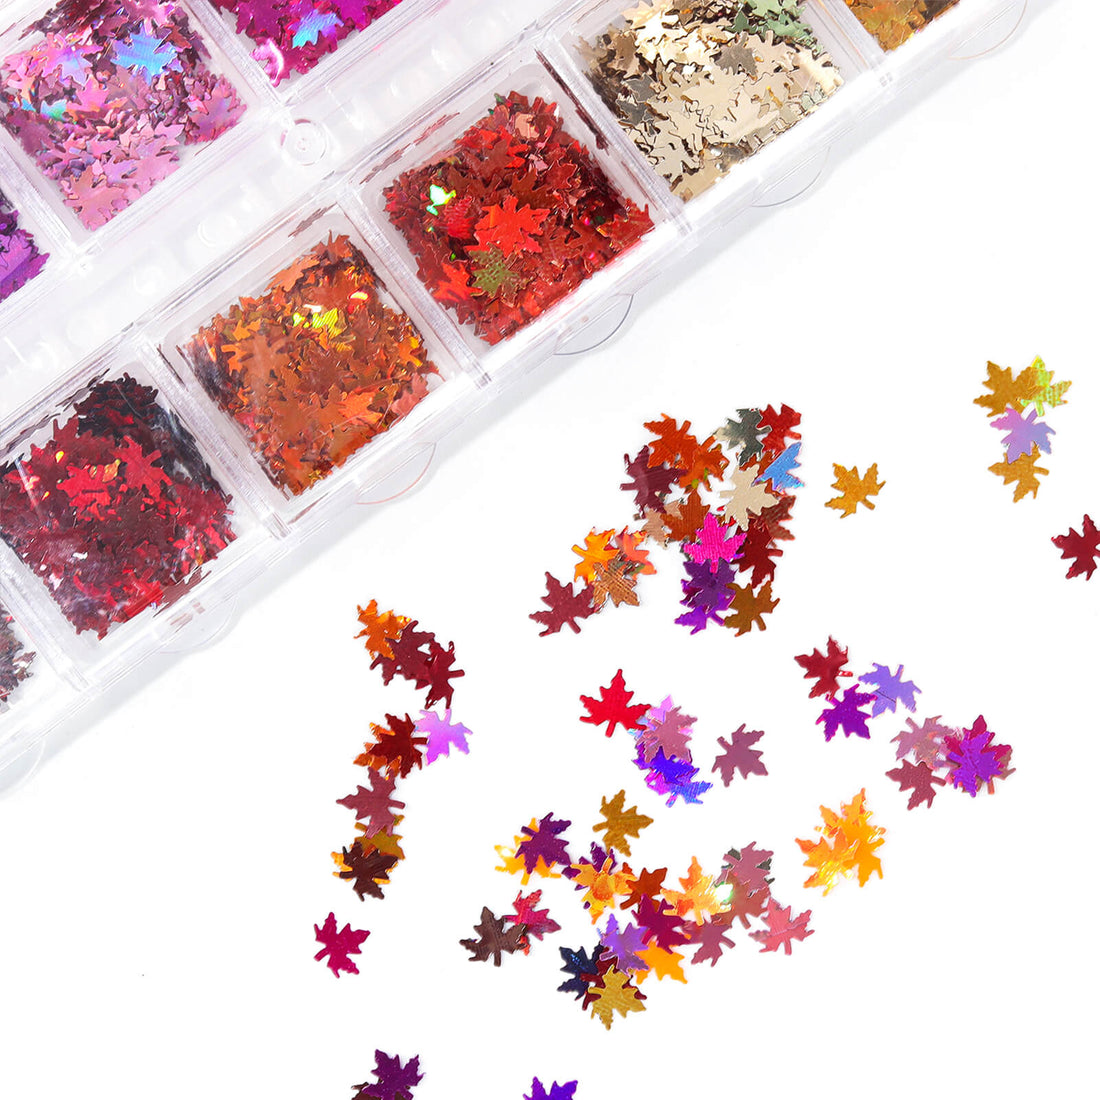     laser-nail-art-maple-leaf-glitter-bright-color-flakes-show